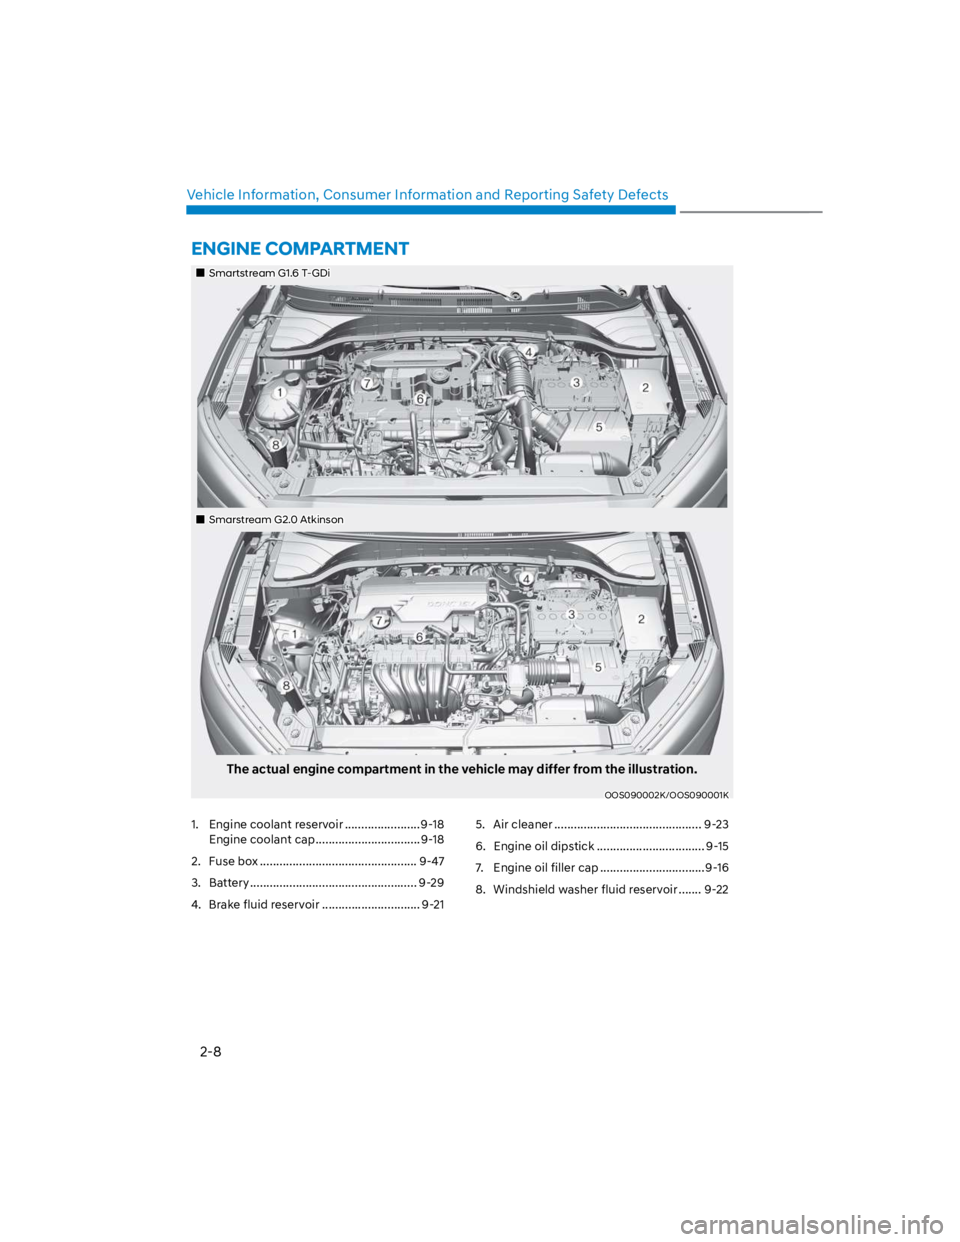 HYUNDAI KONA 2022  Owners Manual 2-8
Vehicle Information, Consumer Information and Reporting Safety Defects
Smartstream G1.6 T-GDi
Smarstream G2.0 Atkinson
The actual engine compartment in the vehicle may differ from the illustration